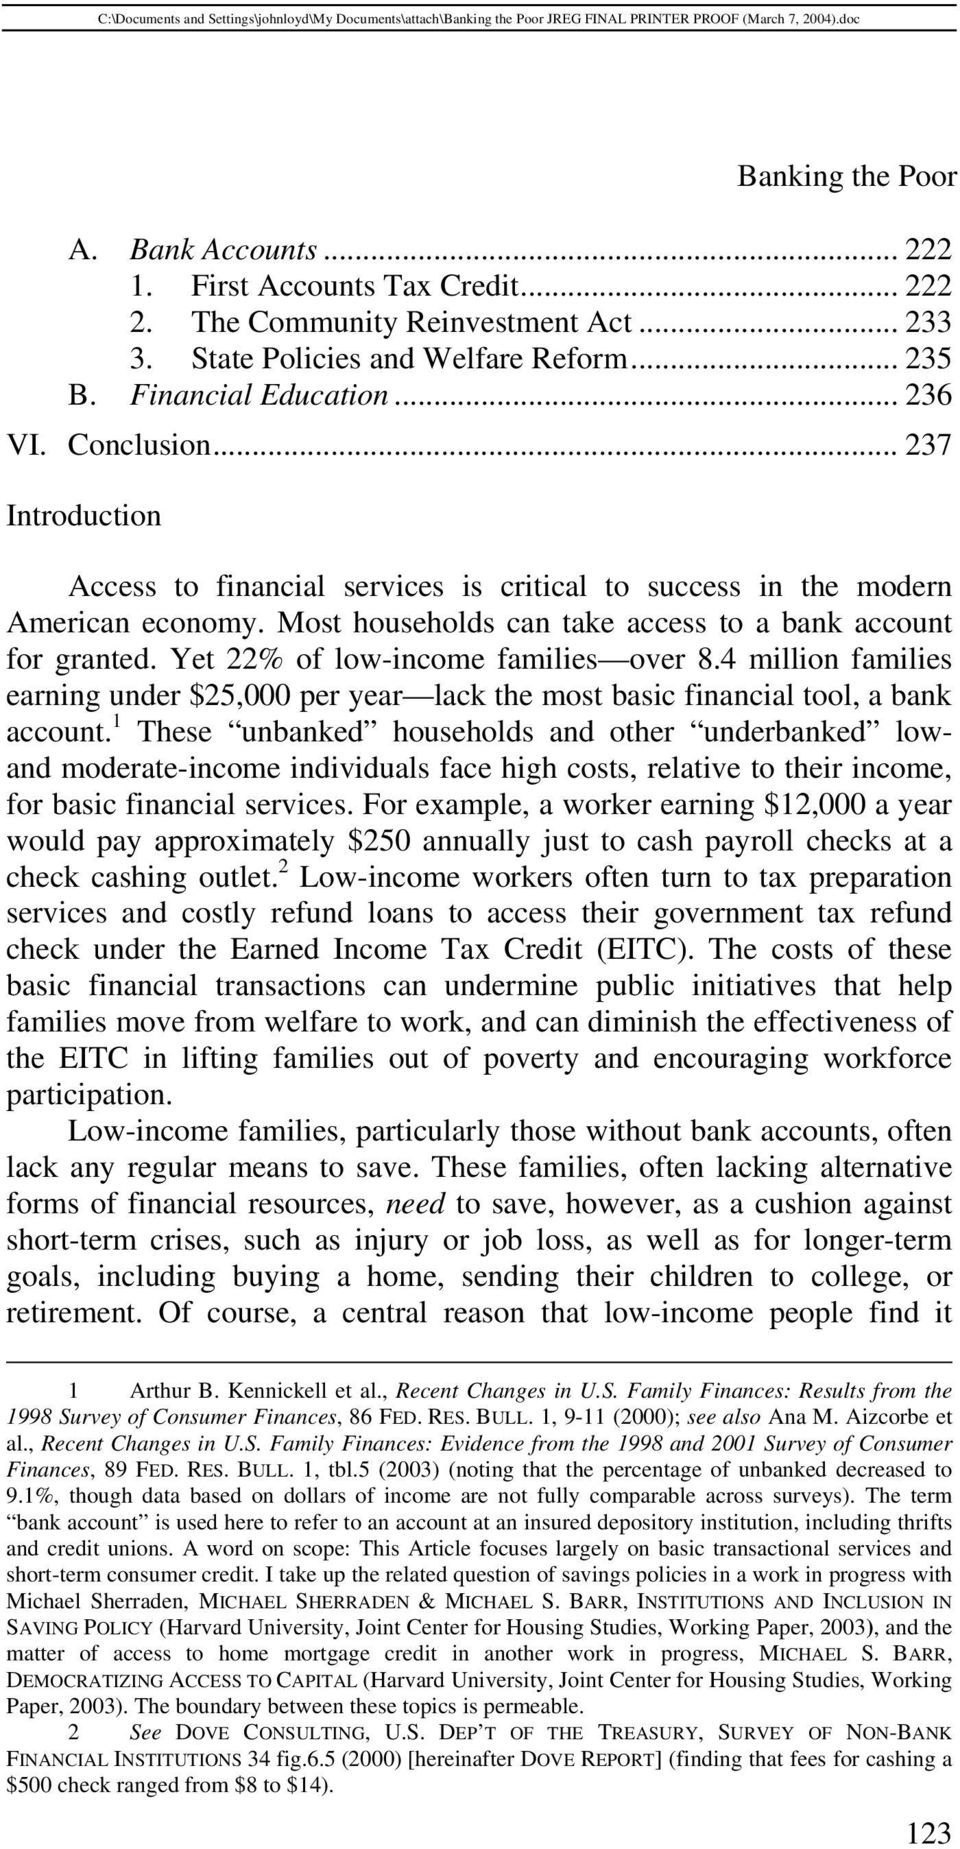 Yet 22% of low-income families over 8.4 million families earning under $25,000 per year lack the most basic financial tool, a bank account.